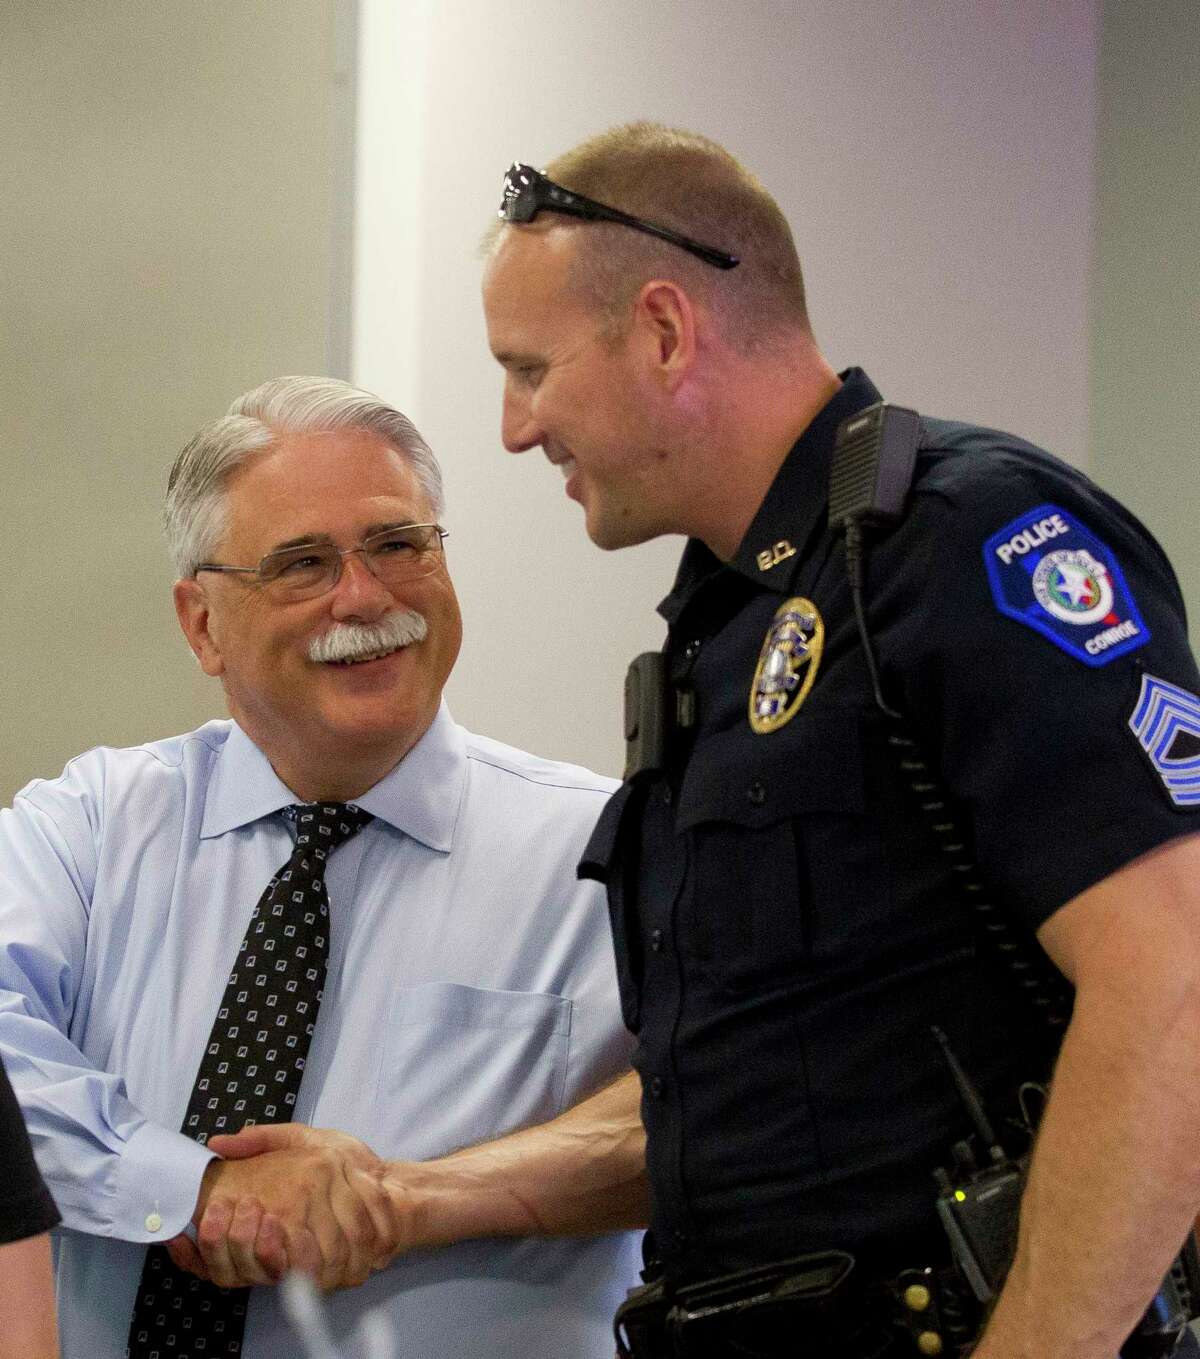 Conroe Police Lt. Bob Berry, left, shakes hands with Sgt. Brent Stowe during Berry's retirement party at the Conroe Police Department and Municipal Courts building Thursday, June 15, 2017, in Conroe.